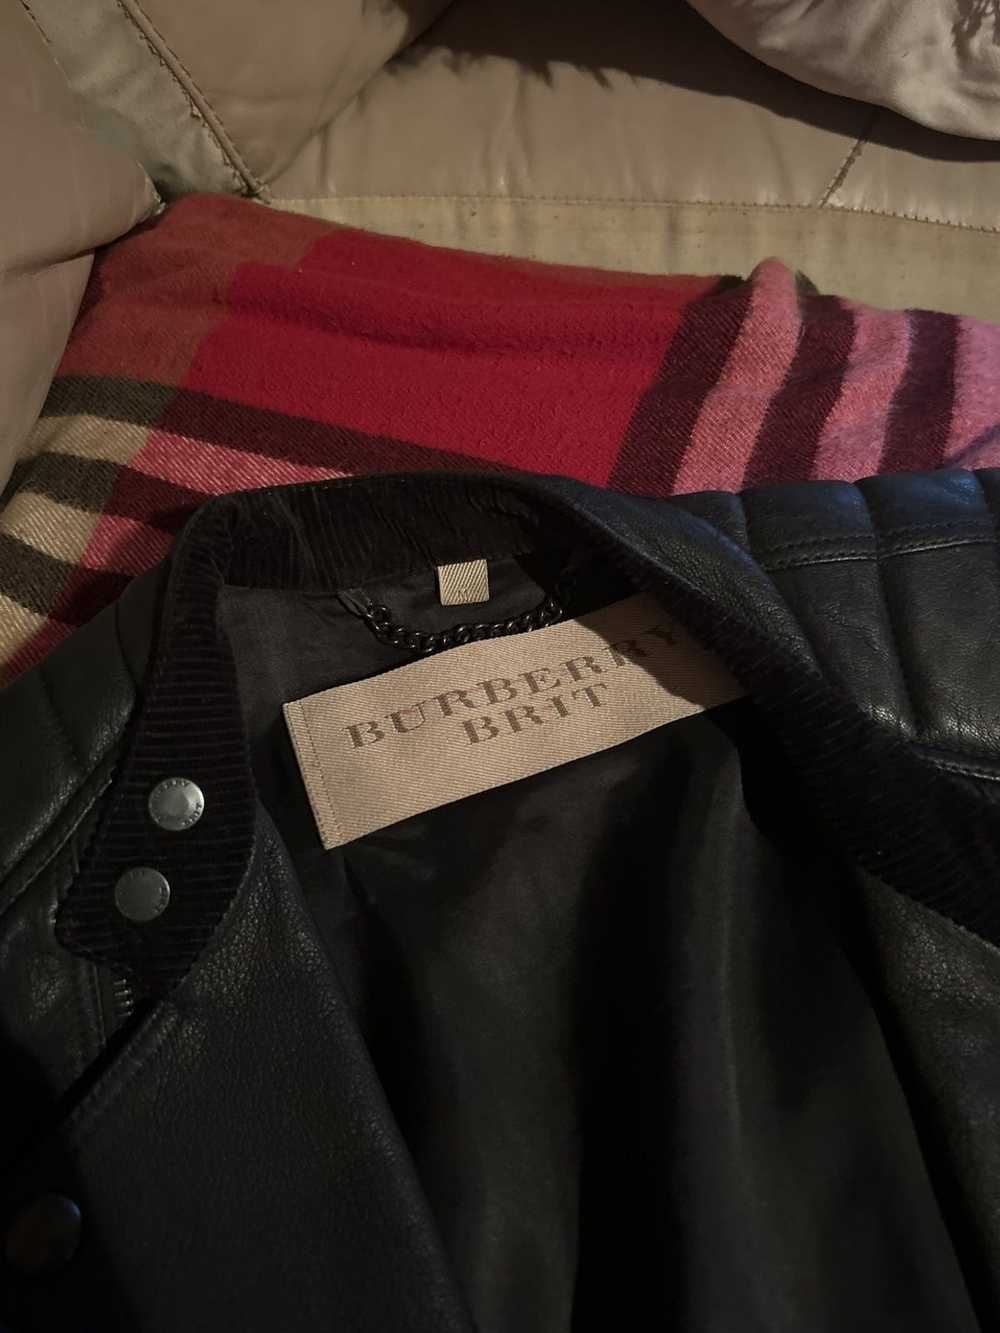 Burberry Burberry Brit Leather Jacket - image 3